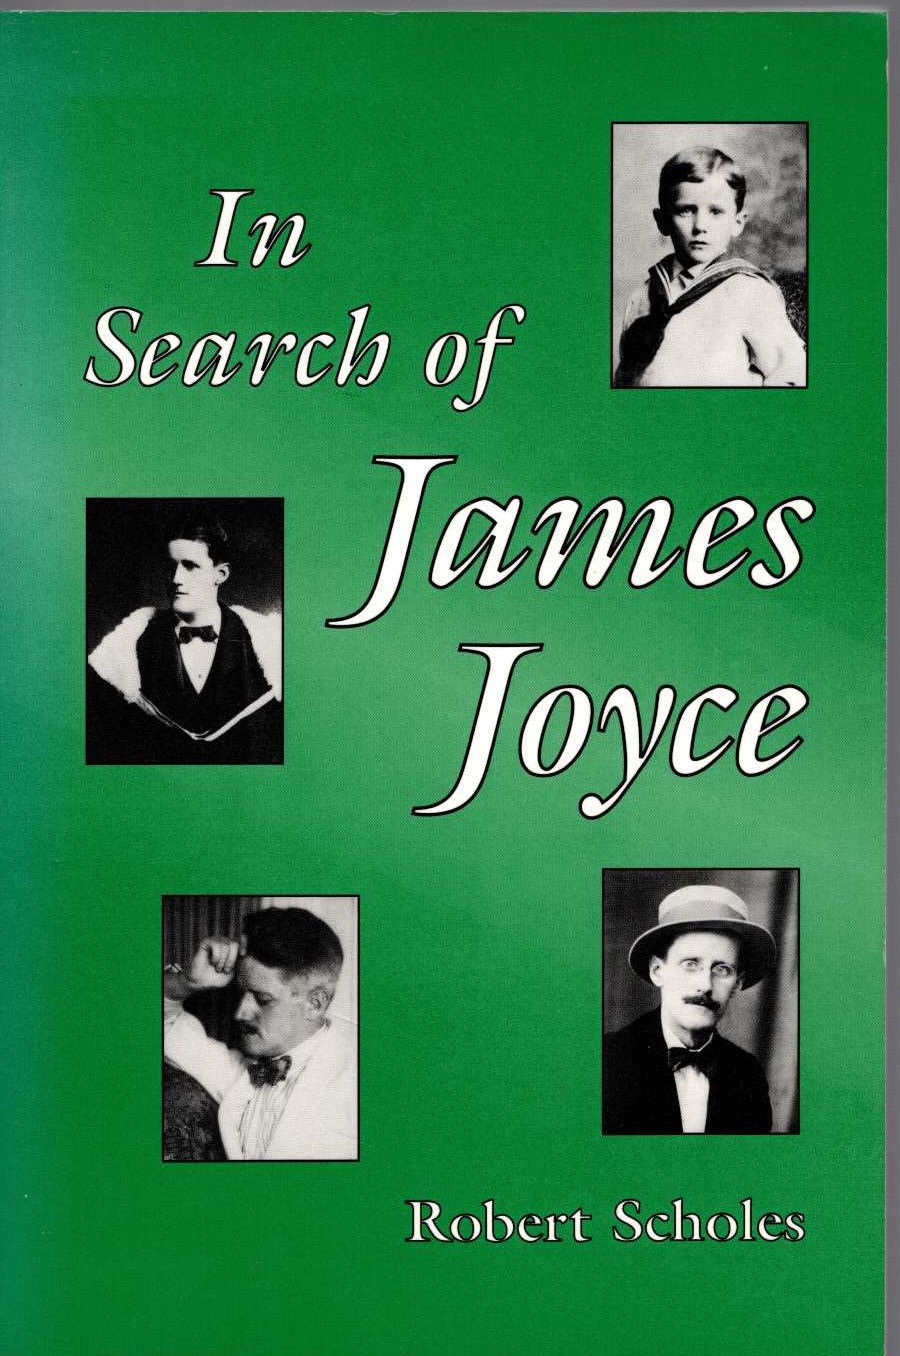 (Robert Scholes) IN SEARCH OF JAMES JOYCE front book cover image